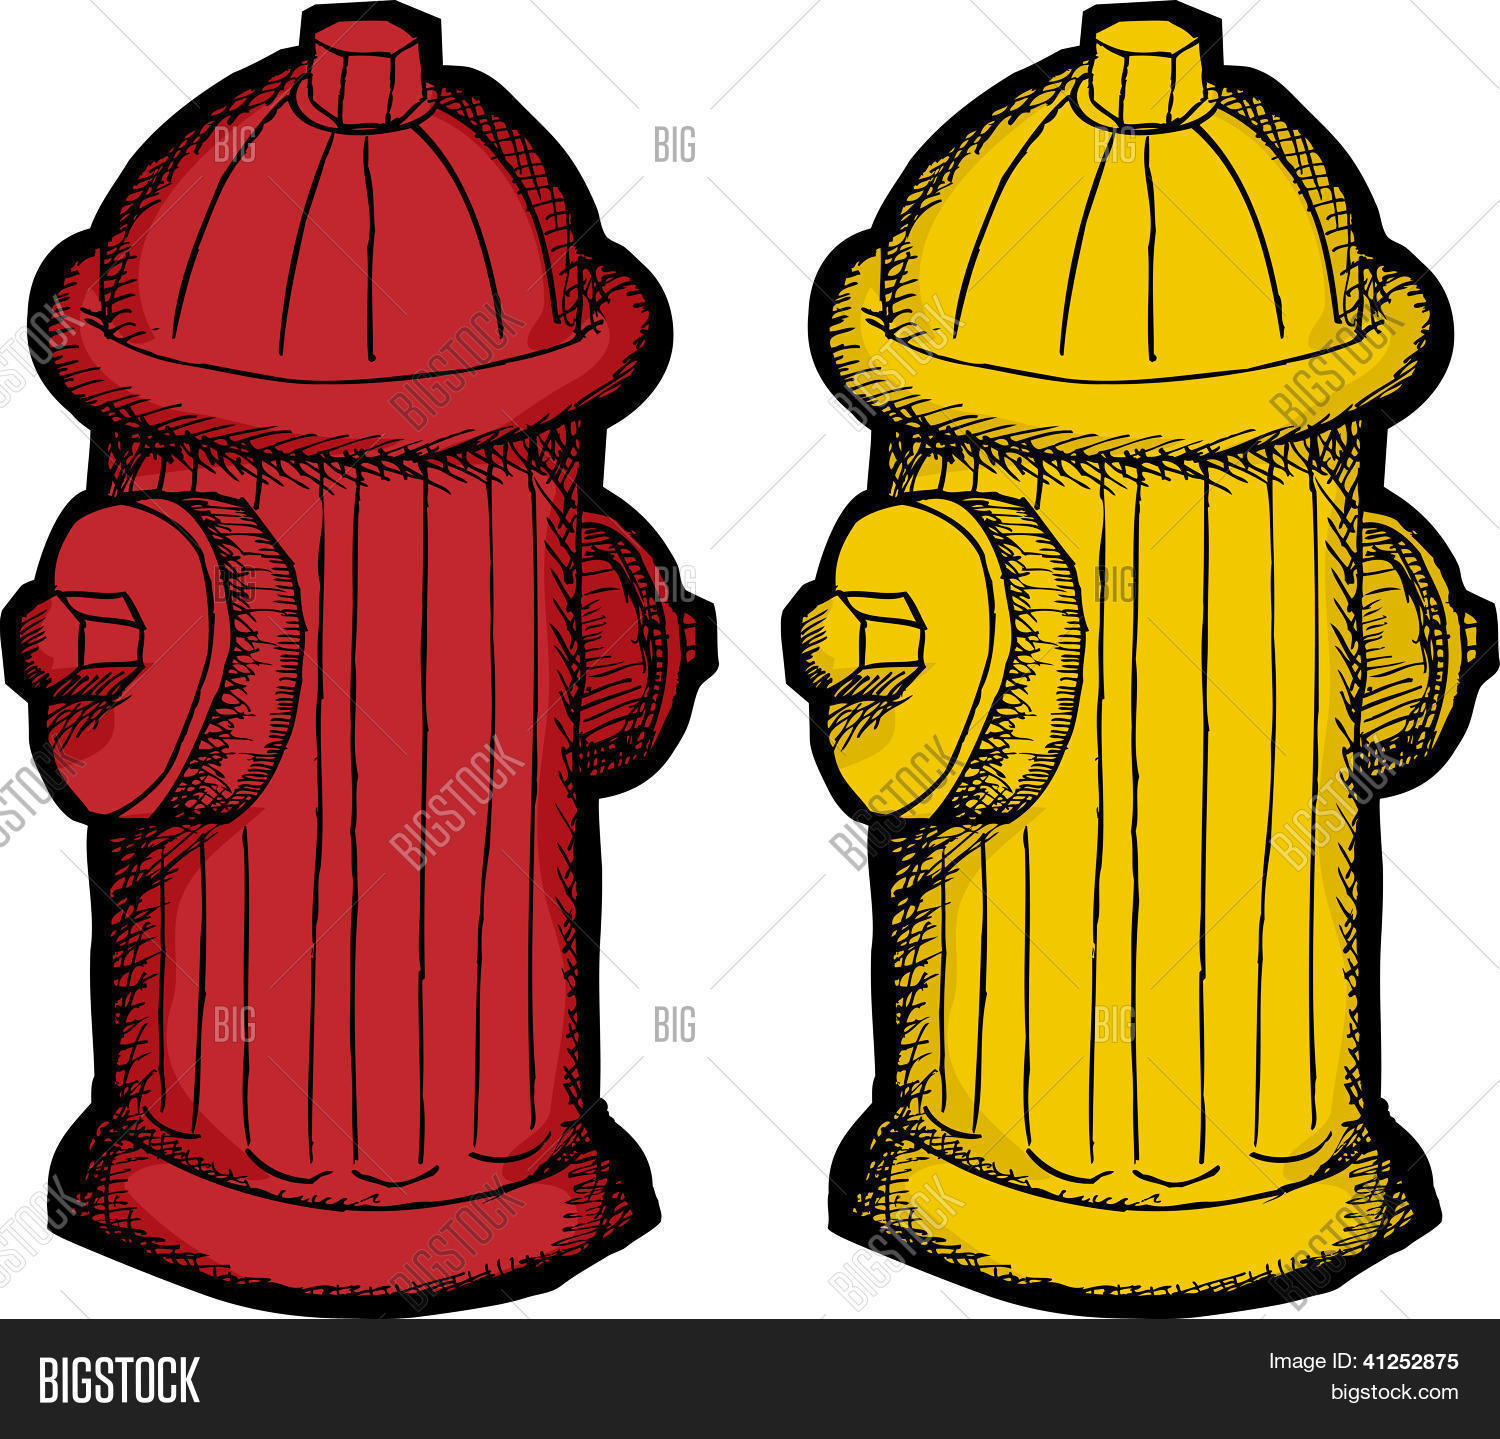 Fire Hydrant Images Clip Art tits ever